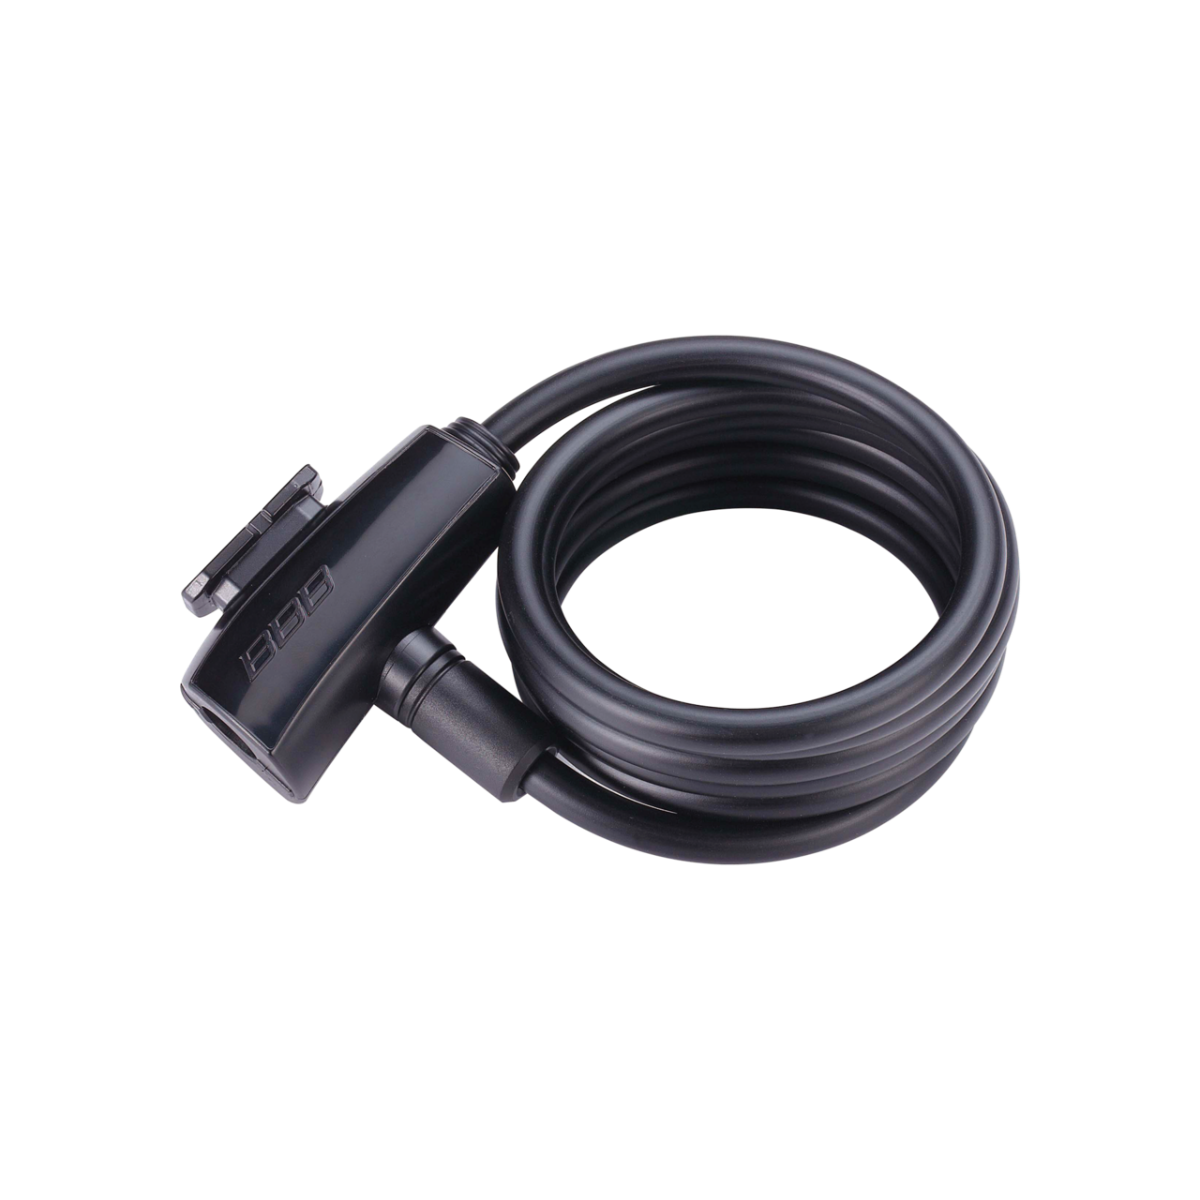 Bicycle lock BBB BBL-61 cyclelock QuickSafe coil cable black 8mmx150cm